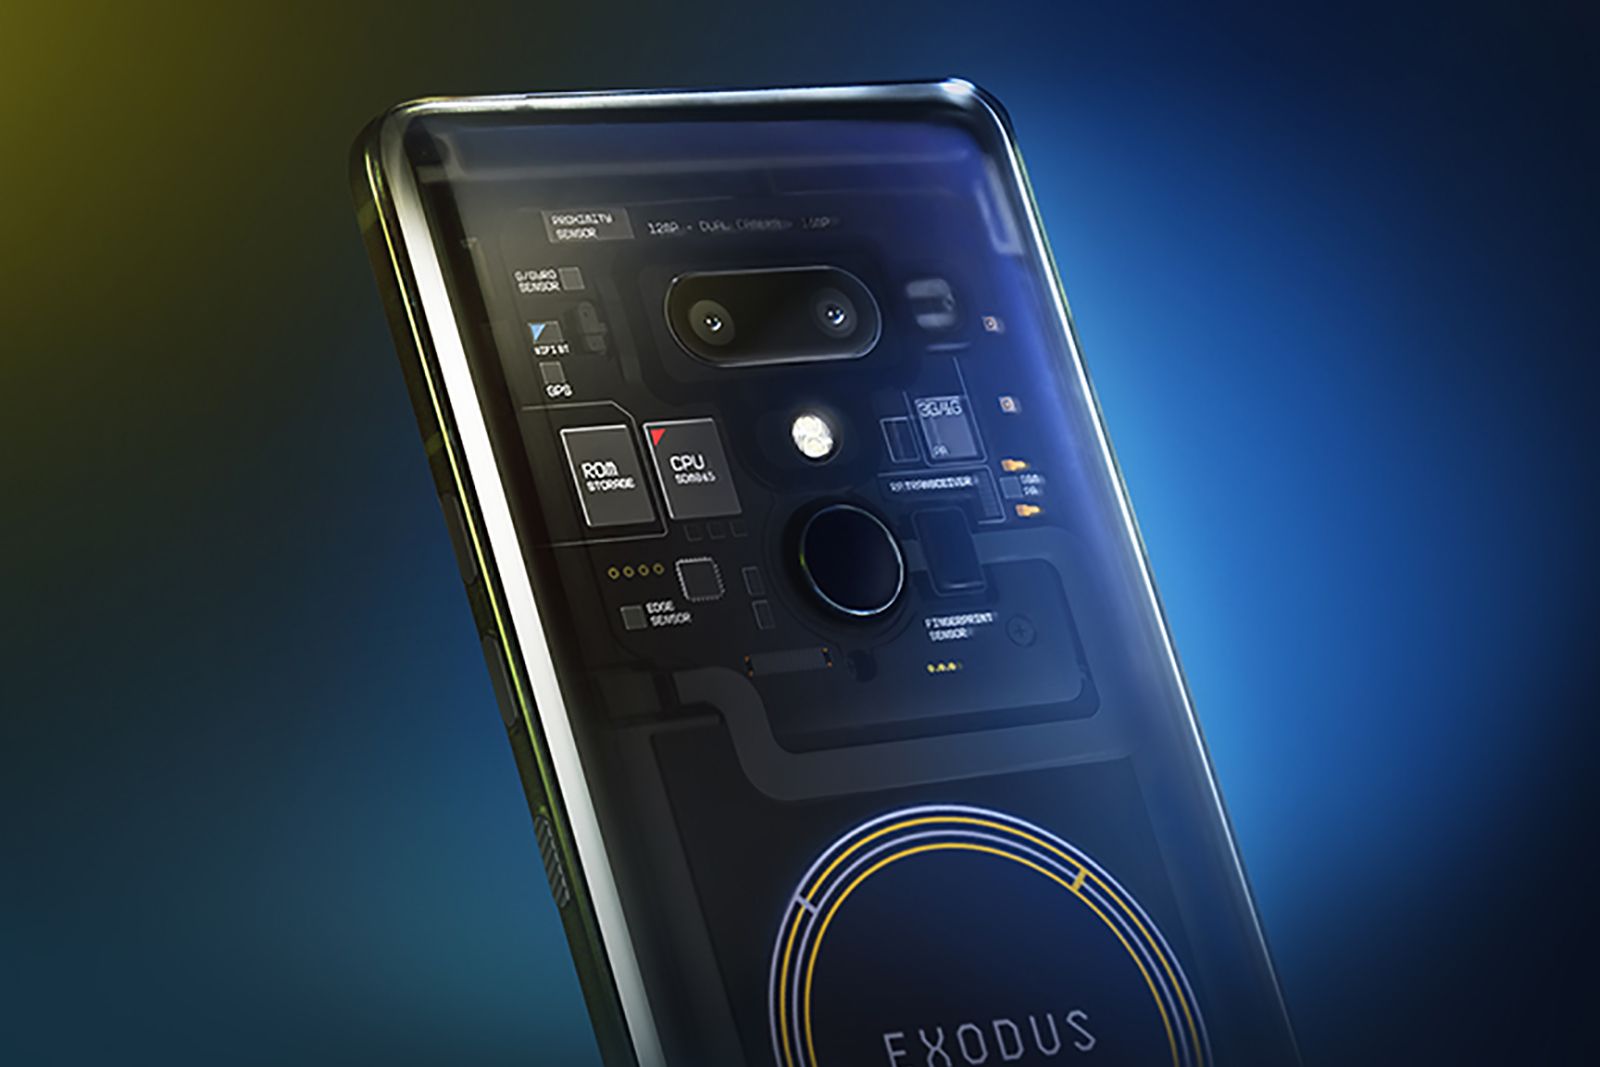 What Can You Do With The Htc Exodus I Blockchain Phone image 1